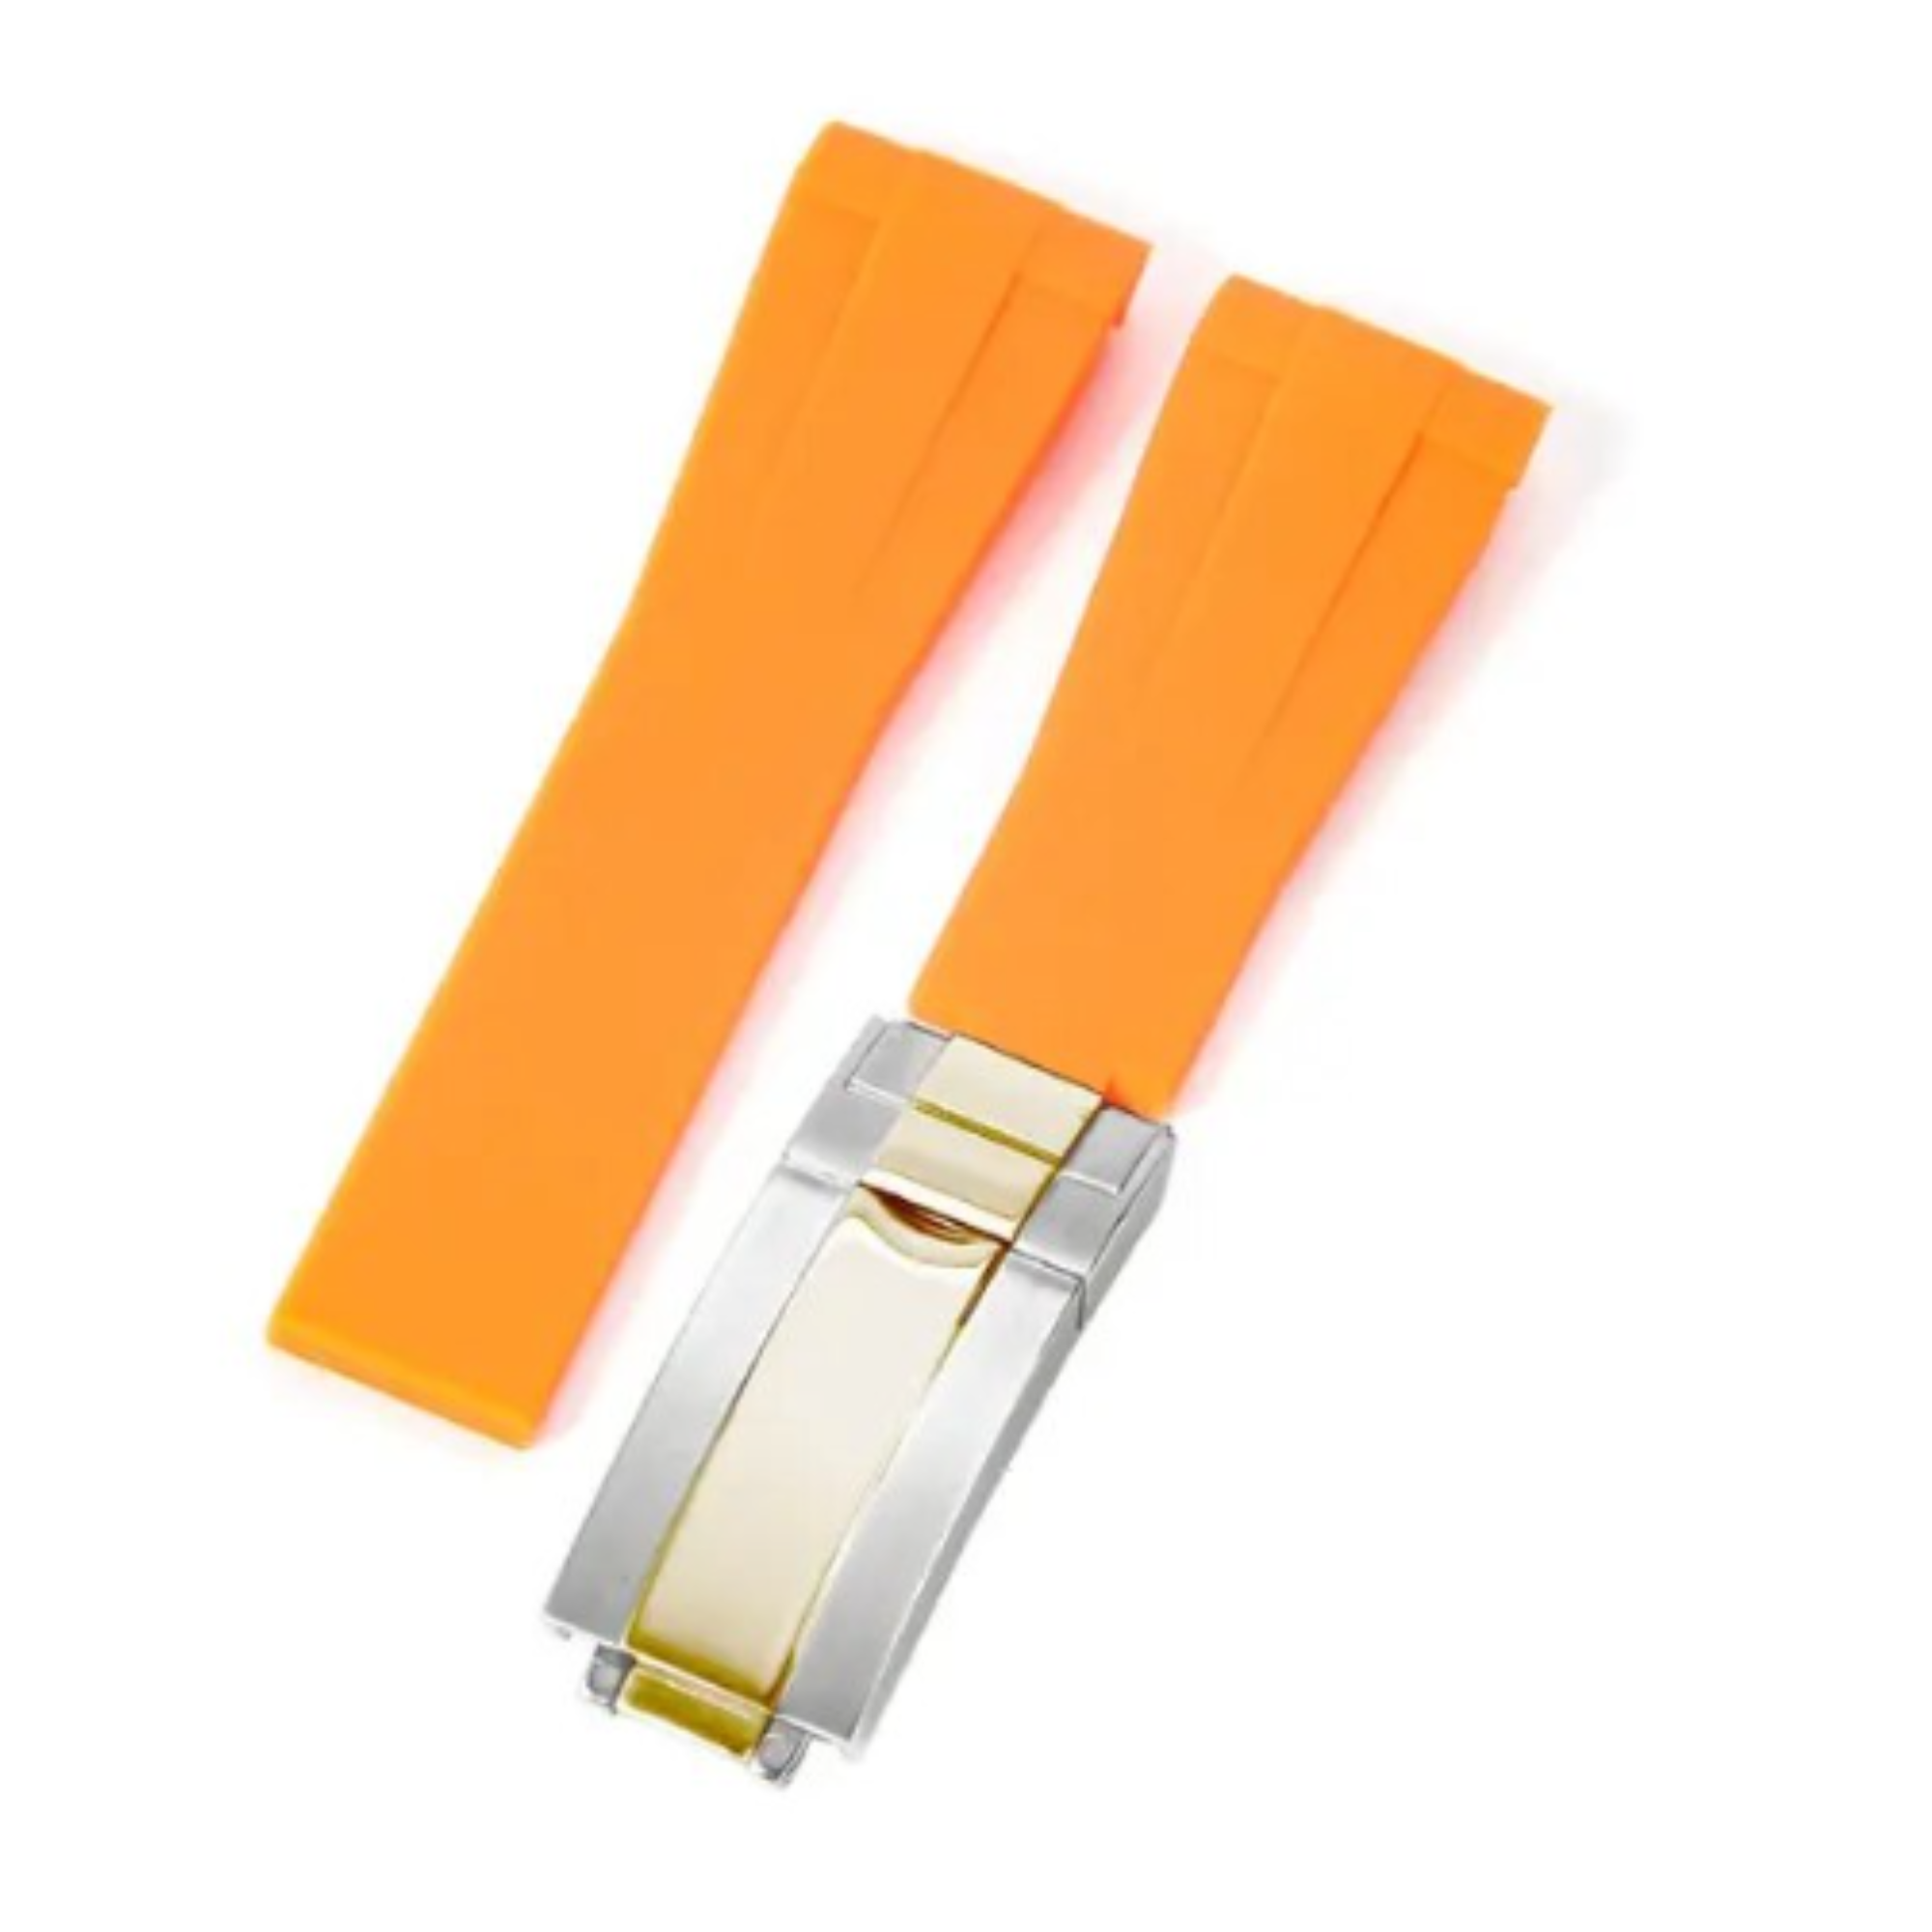 High End Curved FKM Rubber Watch Band with Oyster Style Deployment Clasp: 20 mm - Orange with Gold Dual tone